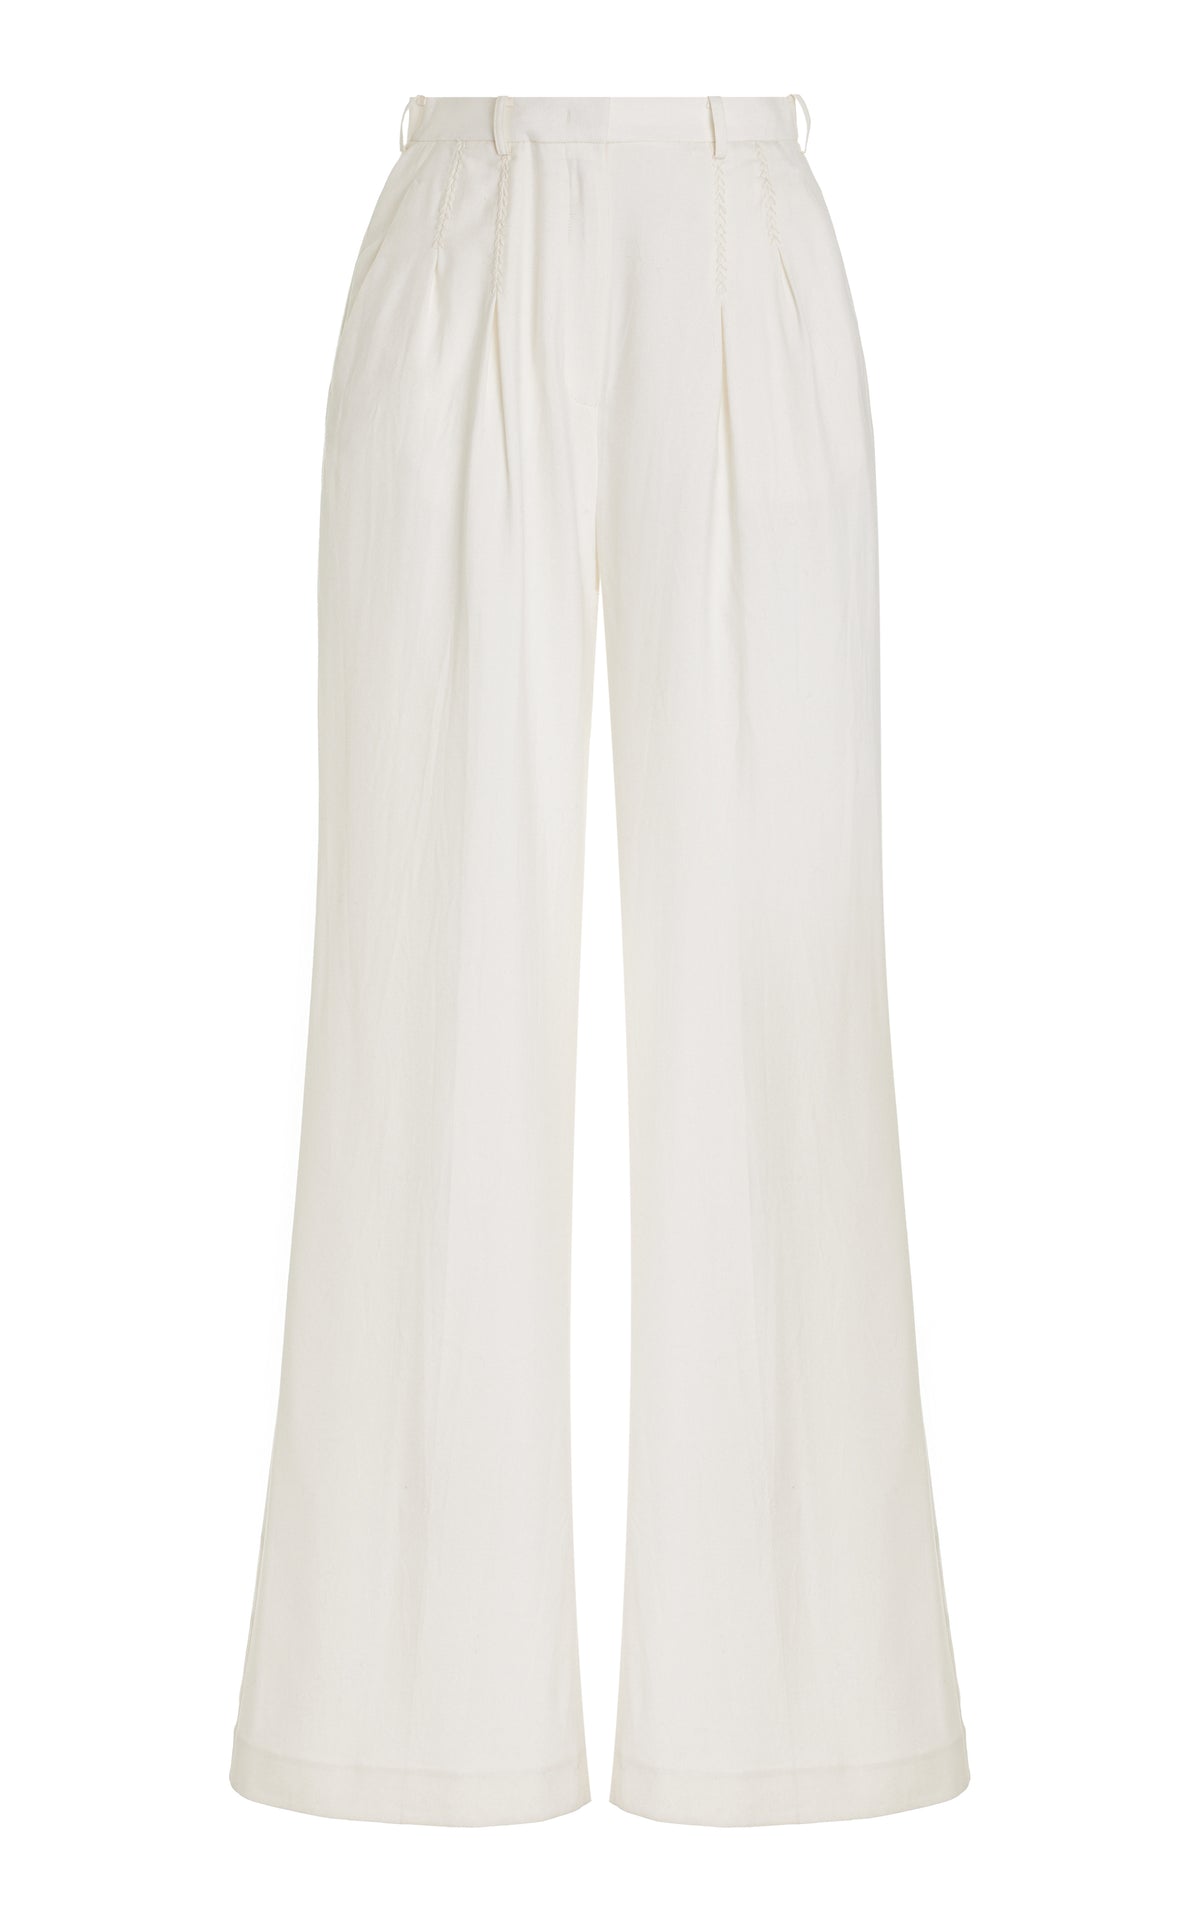 Vargas Pant in Ivory Lightweight Cashmere